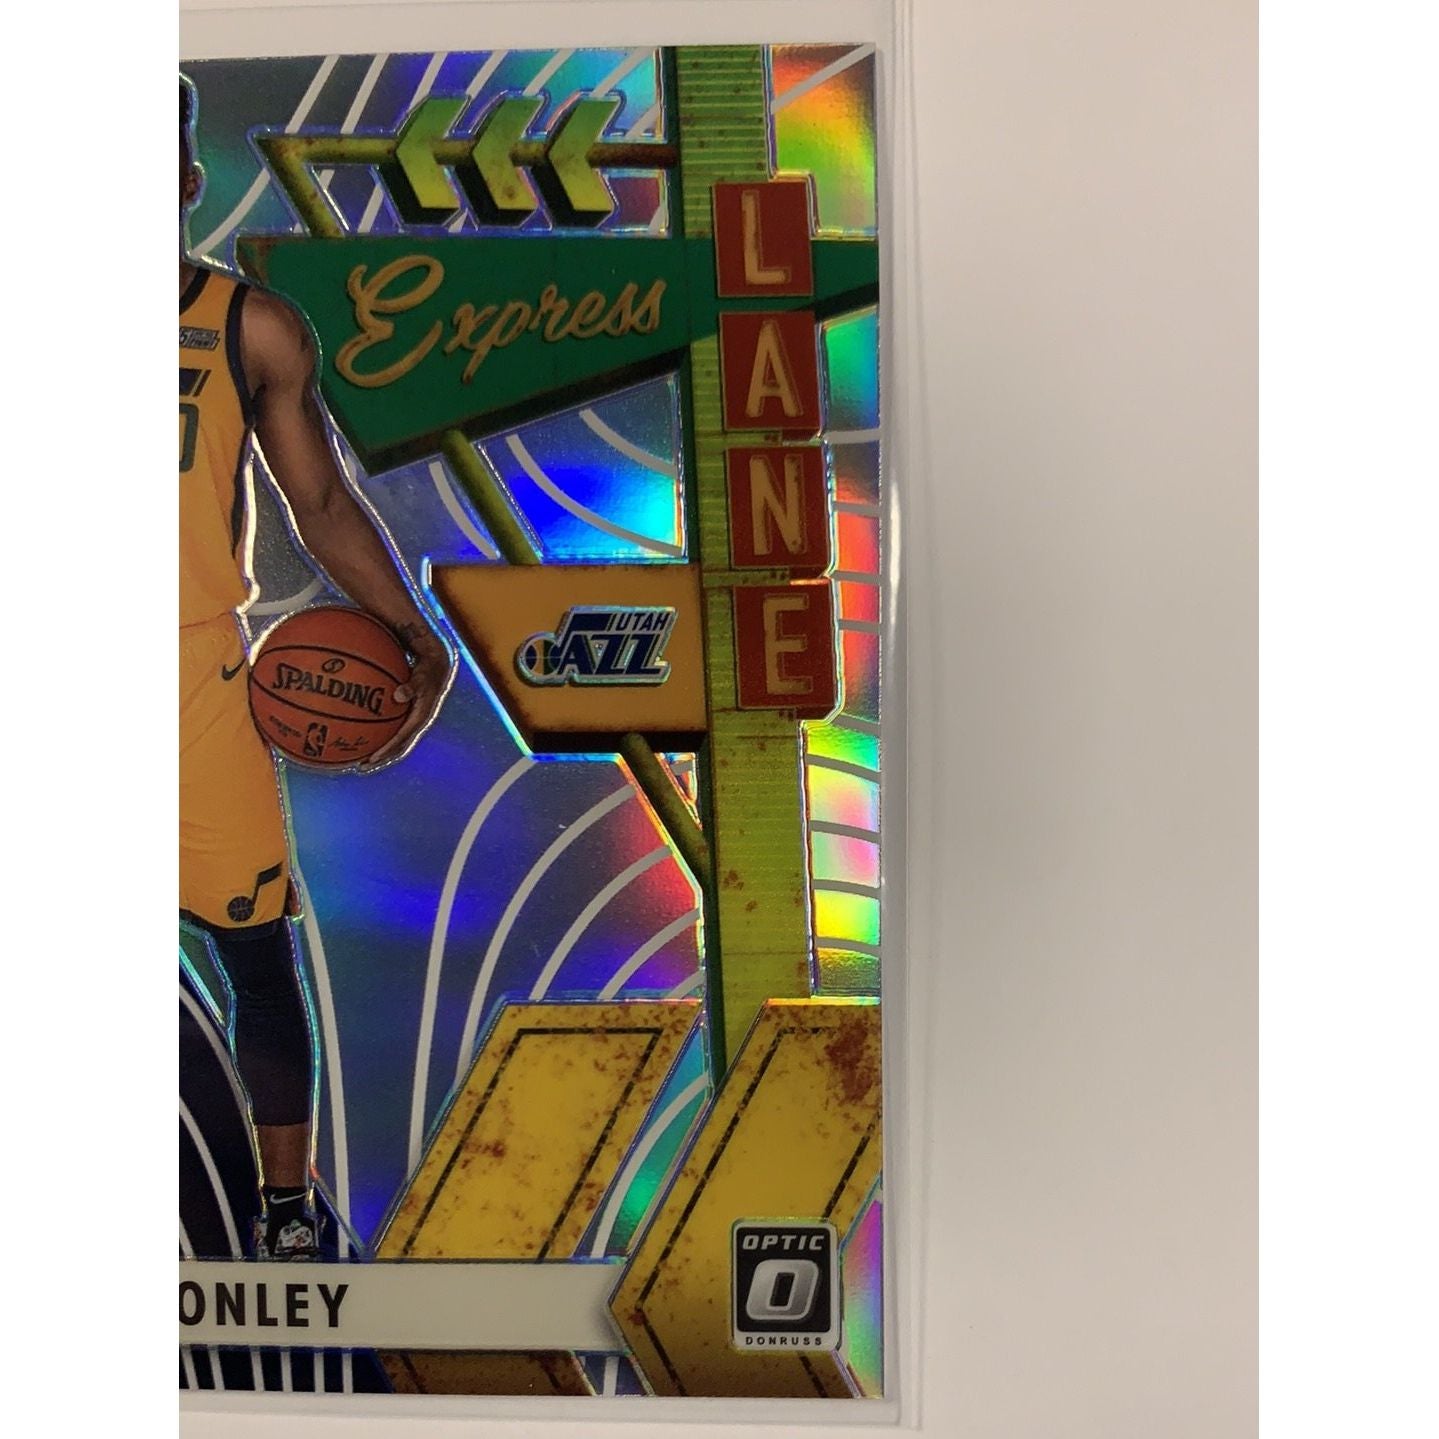  2019-20 Donruss Optic Mike Conley Express Lane Silver Holo  Local Legends Cards & Collectibles